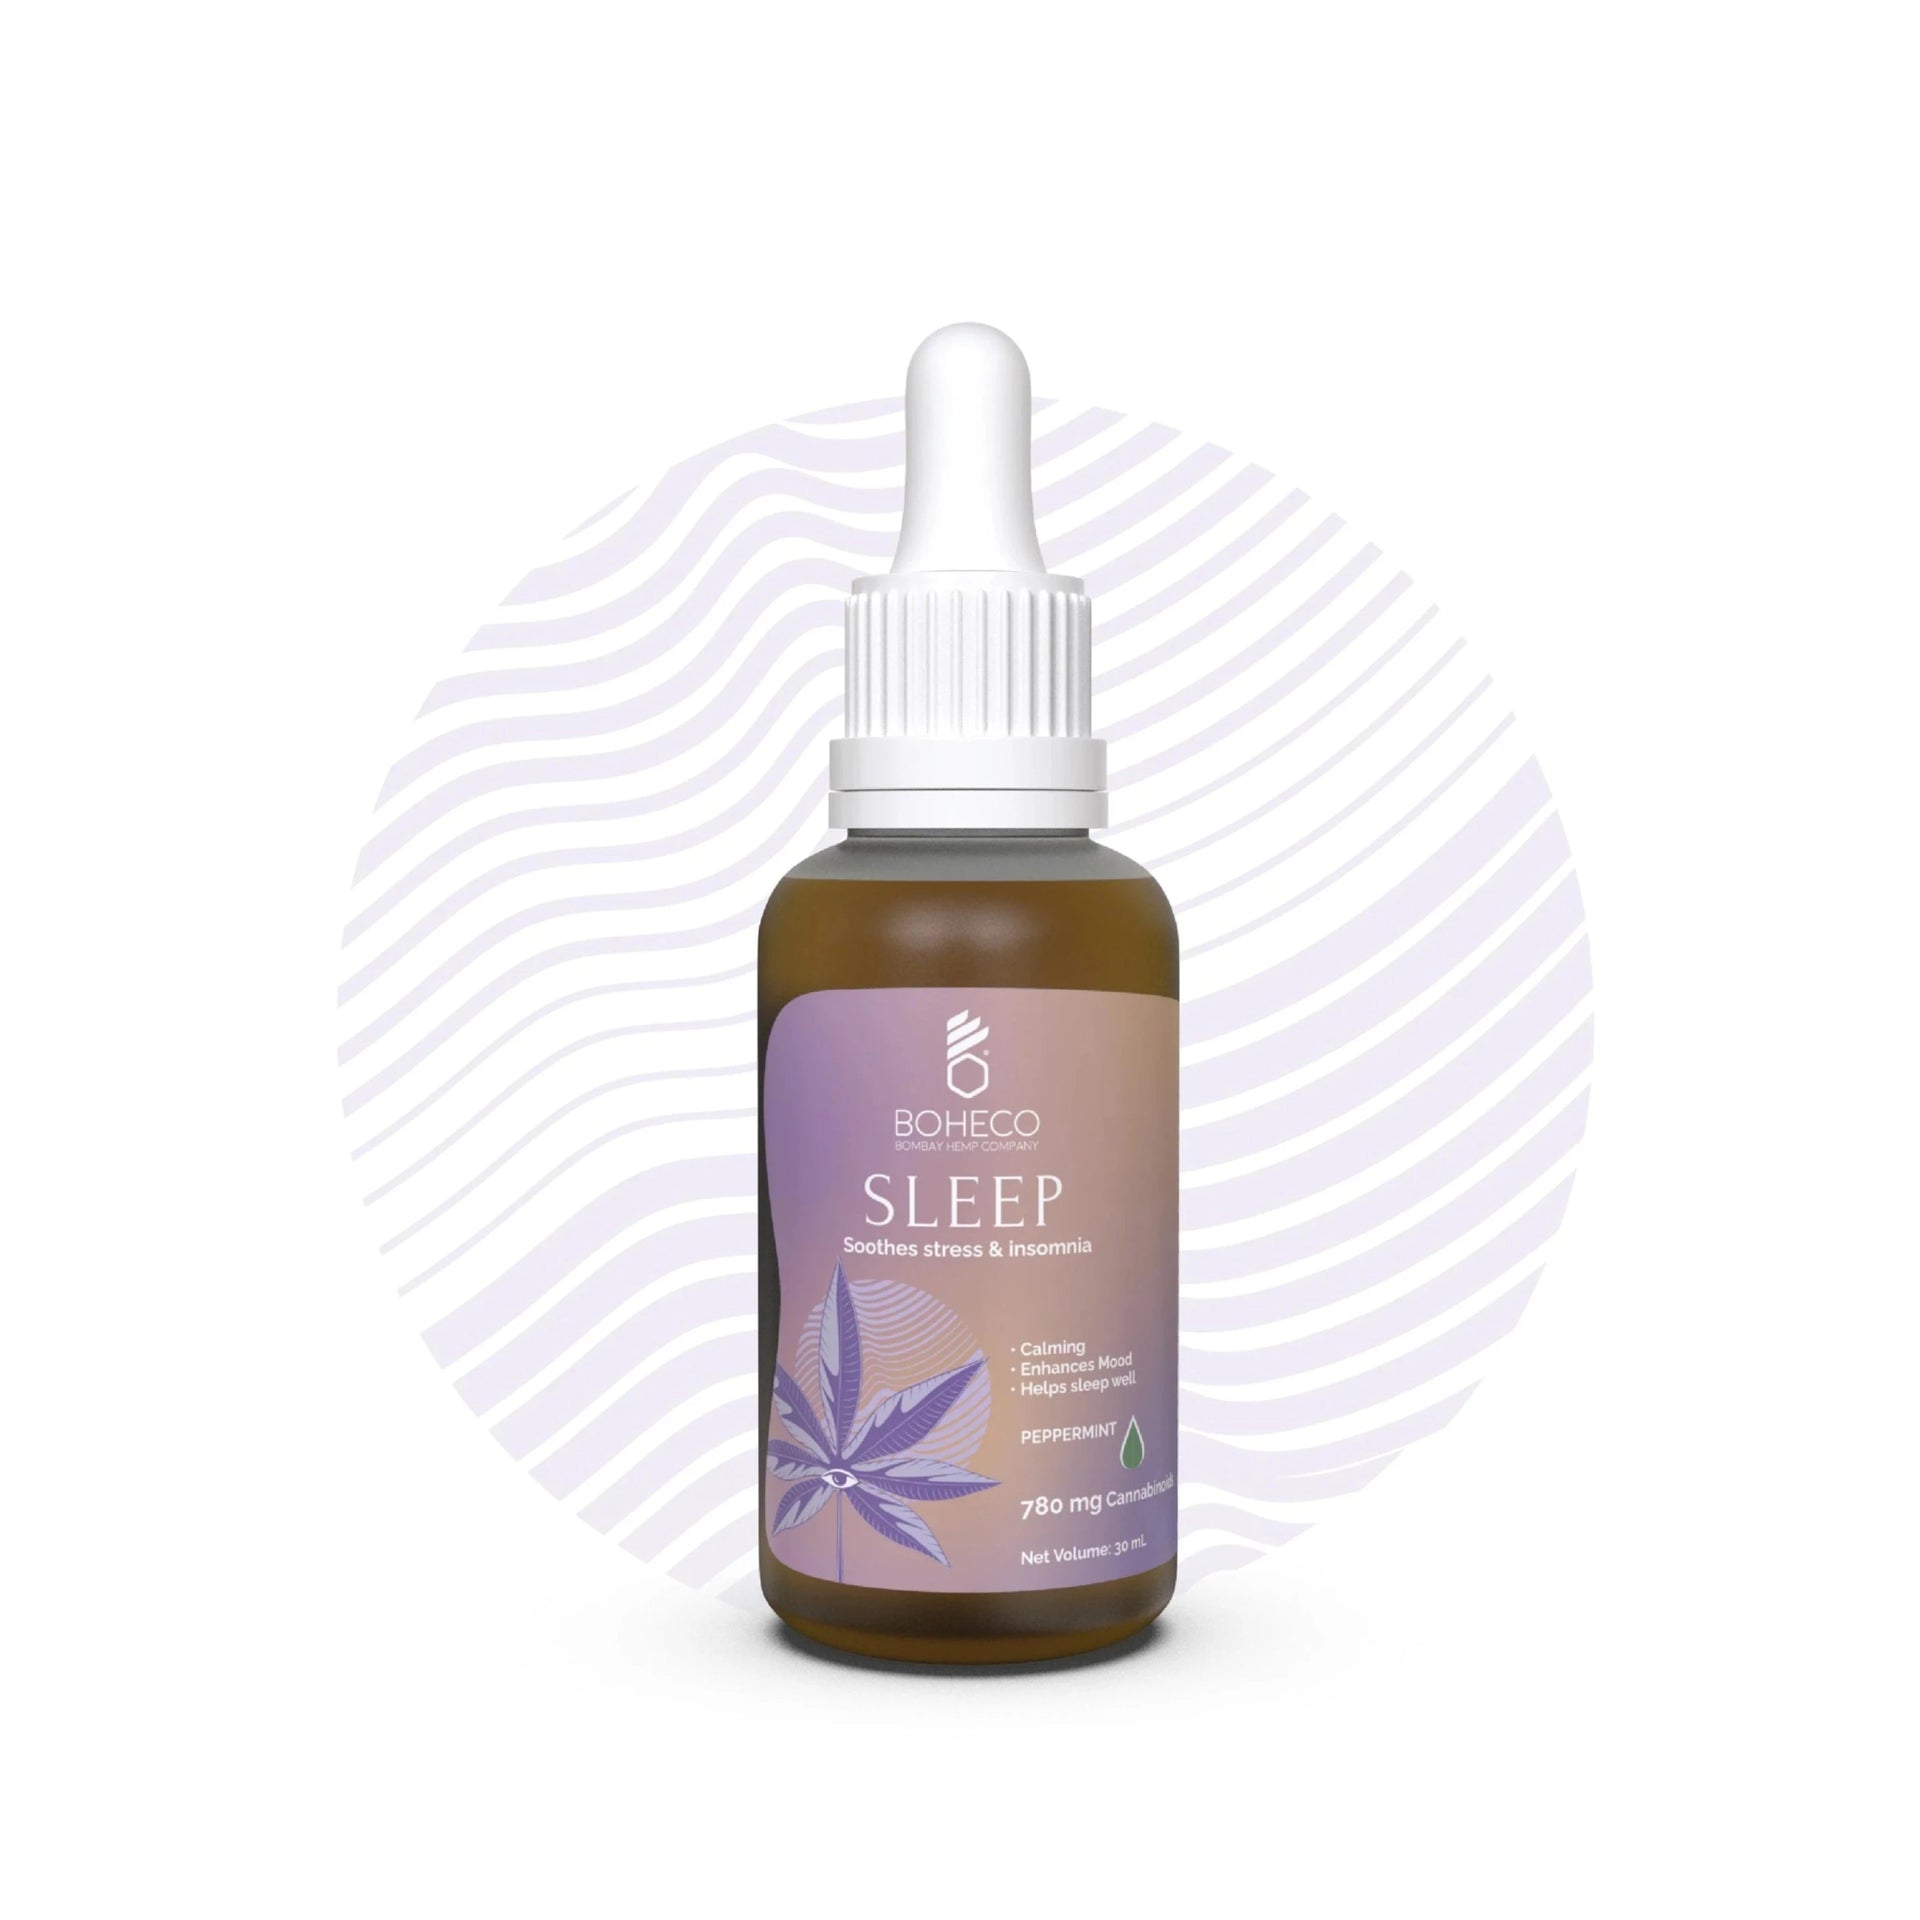 Boheco Sleep (Fennel) - Soothes Stress & Insomnia Medical Cannabis Tincture - CBD Store India